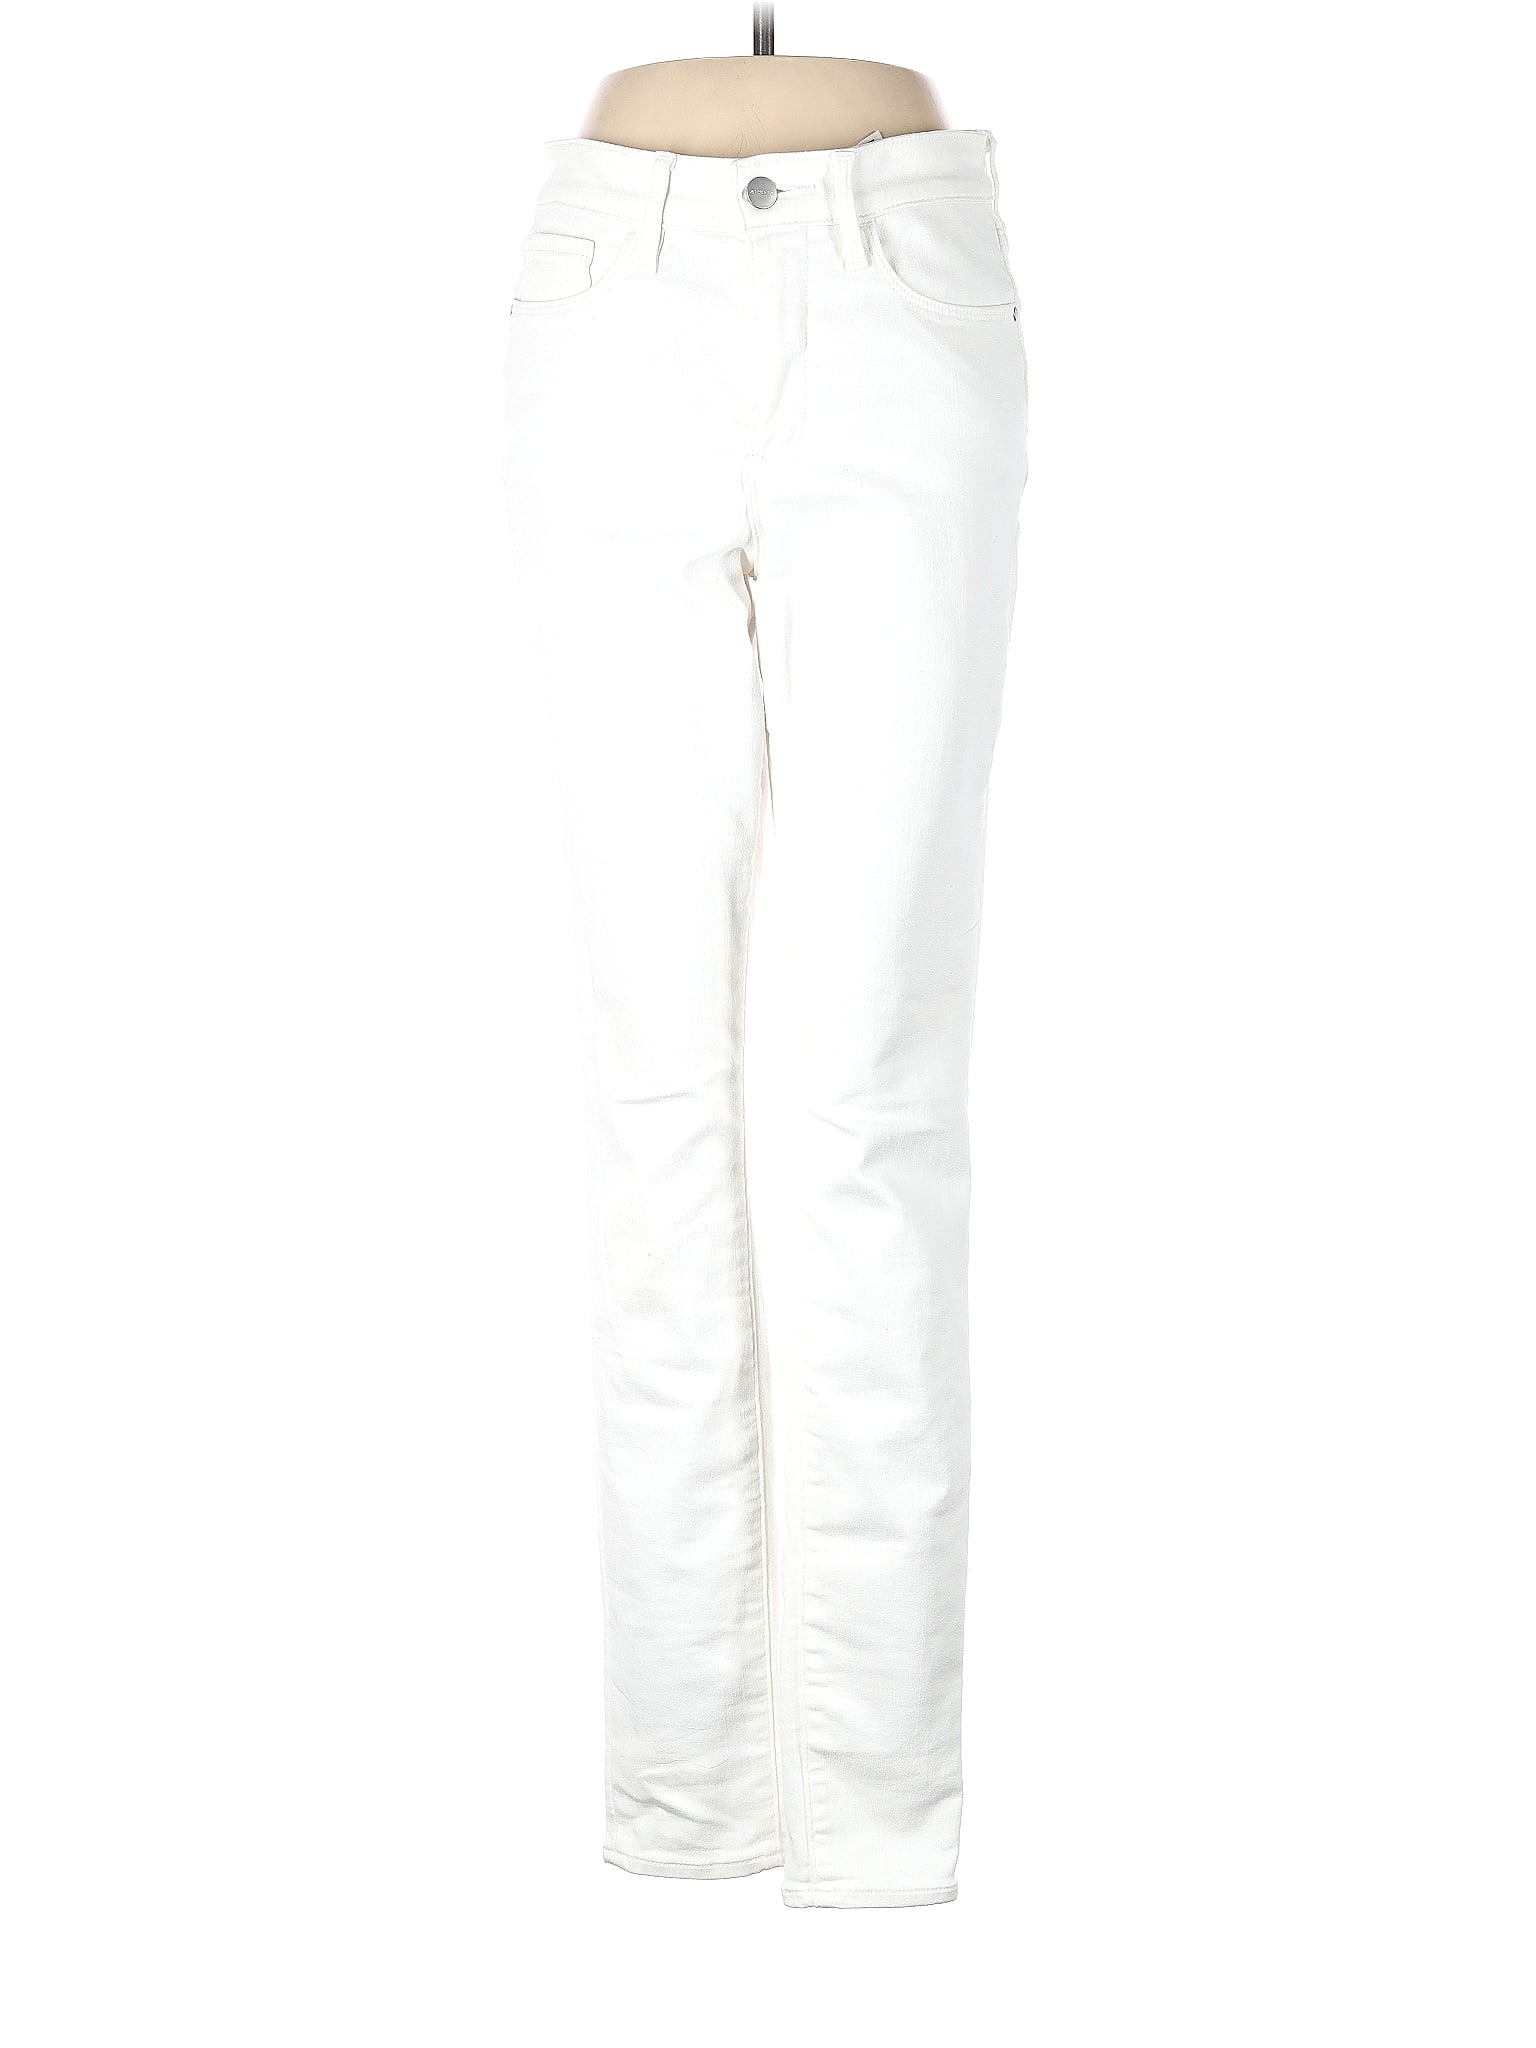 Athleta Solid White Ivory Jeans Size 6 (Tall) - 71% off | ThredUp